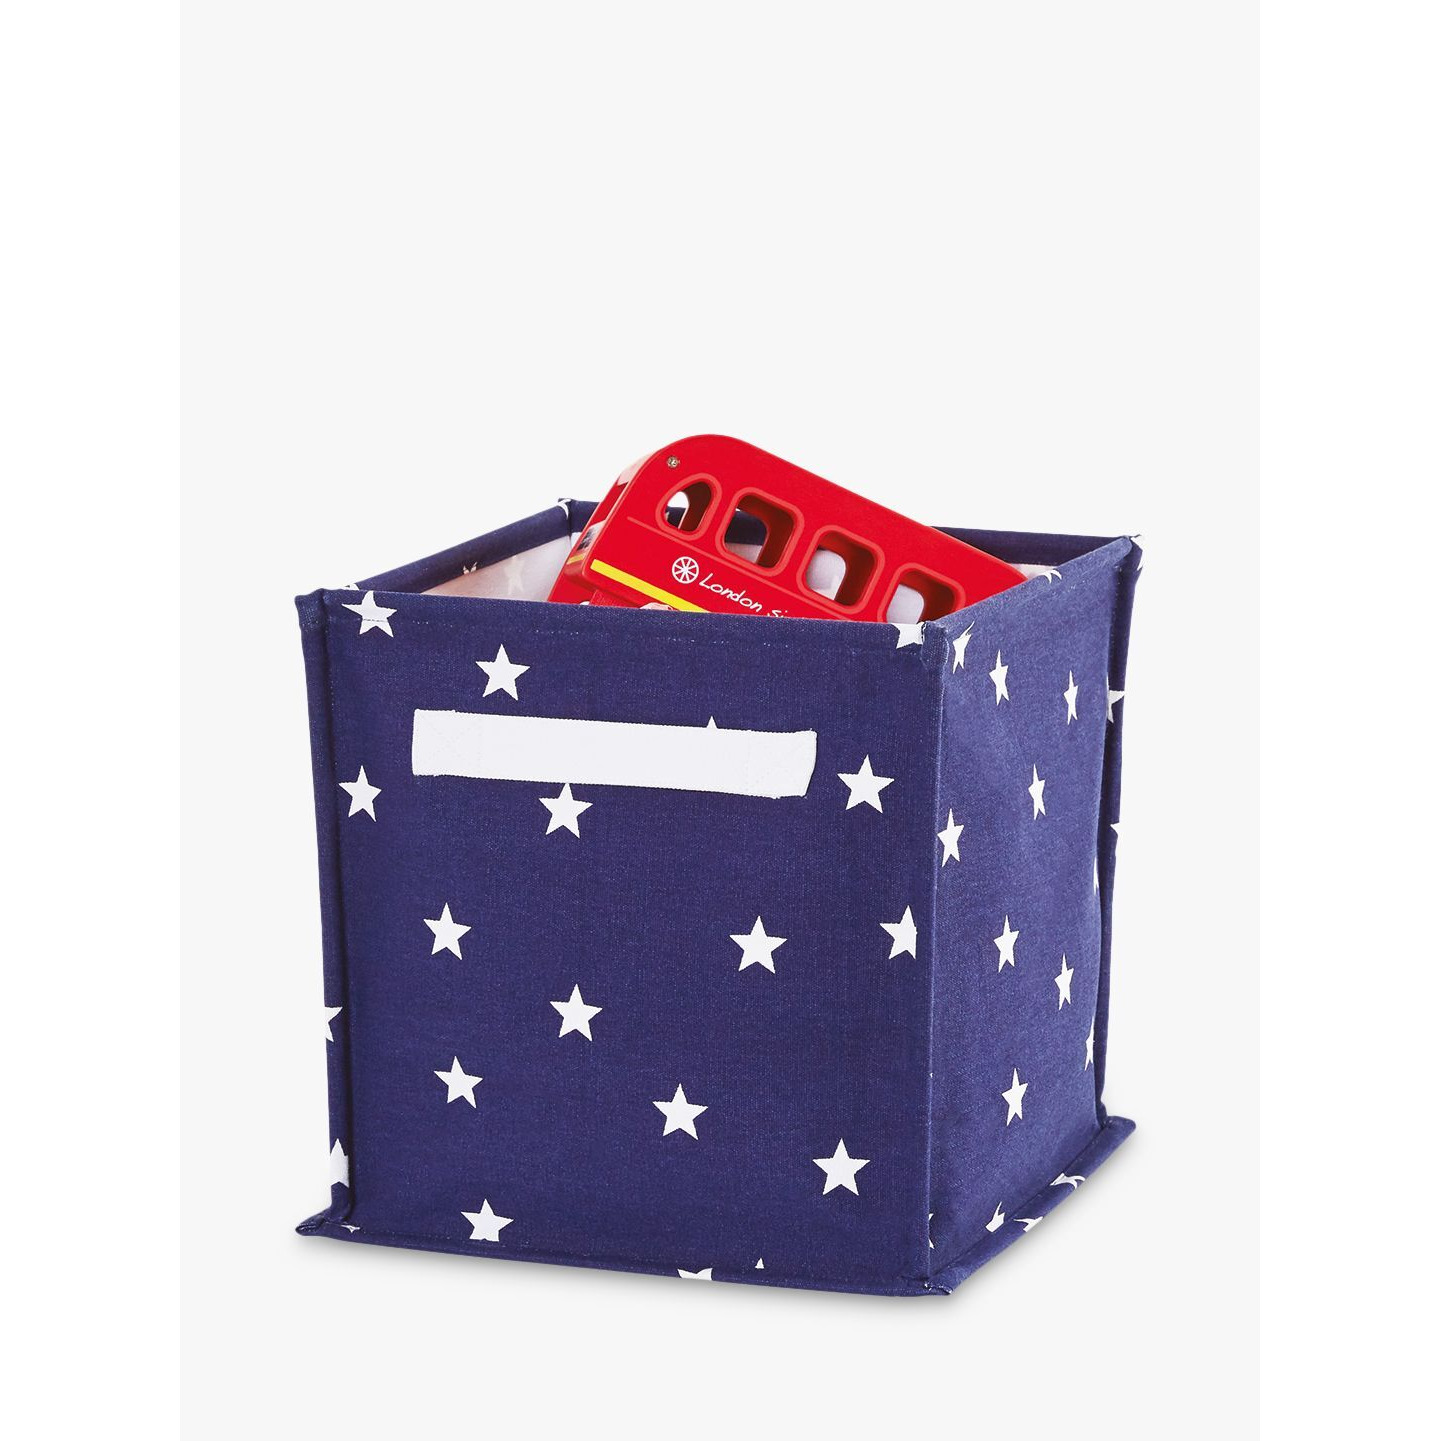 Great Little Trading Co Canvas Storage Cube Box - image 1